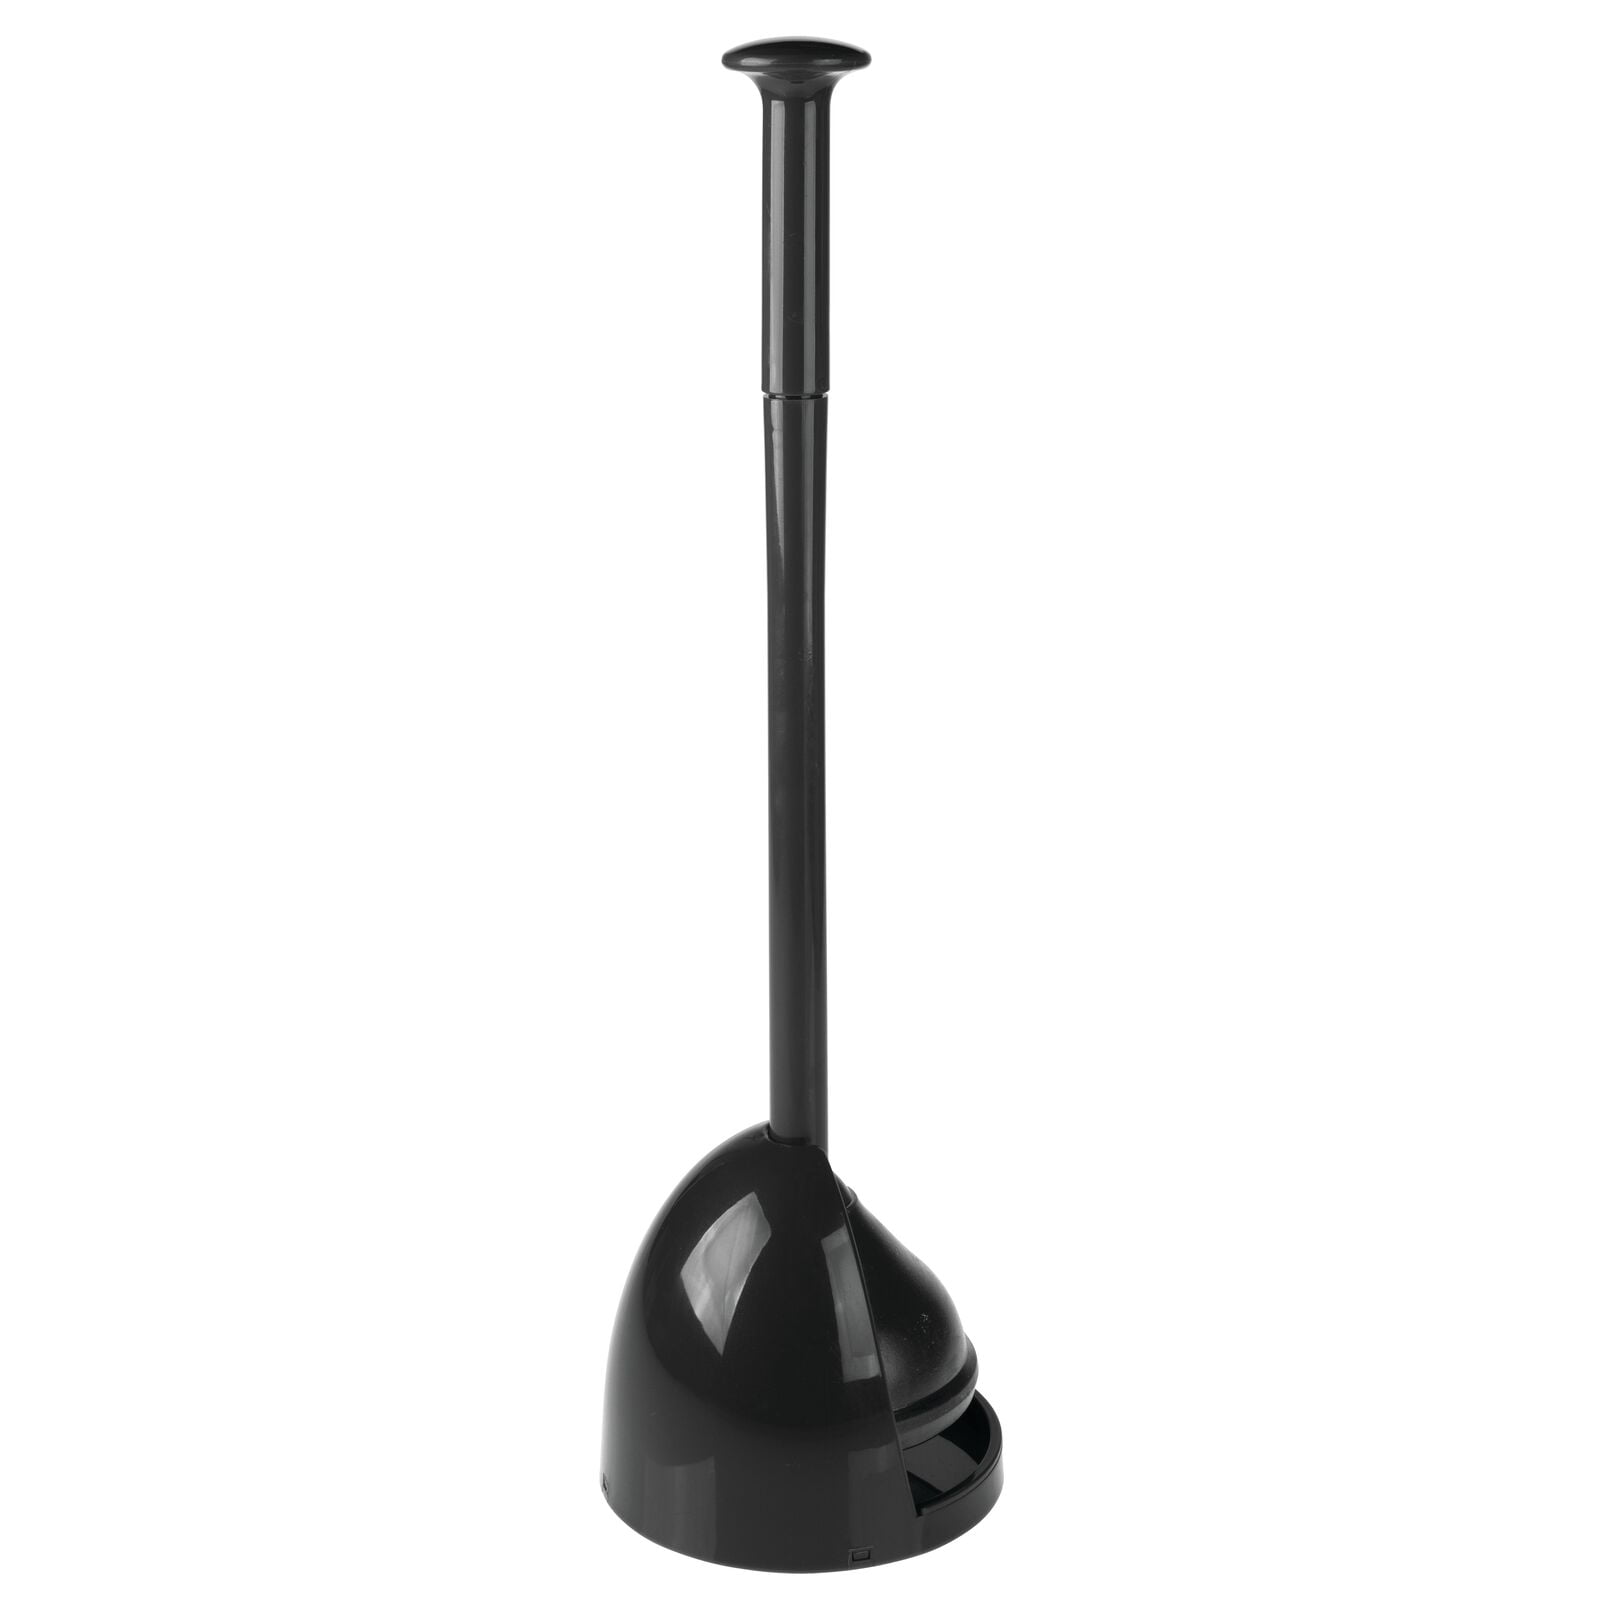 mDesign Plastic Toilet Bowl Plunger Set with Drip Tray Compact 